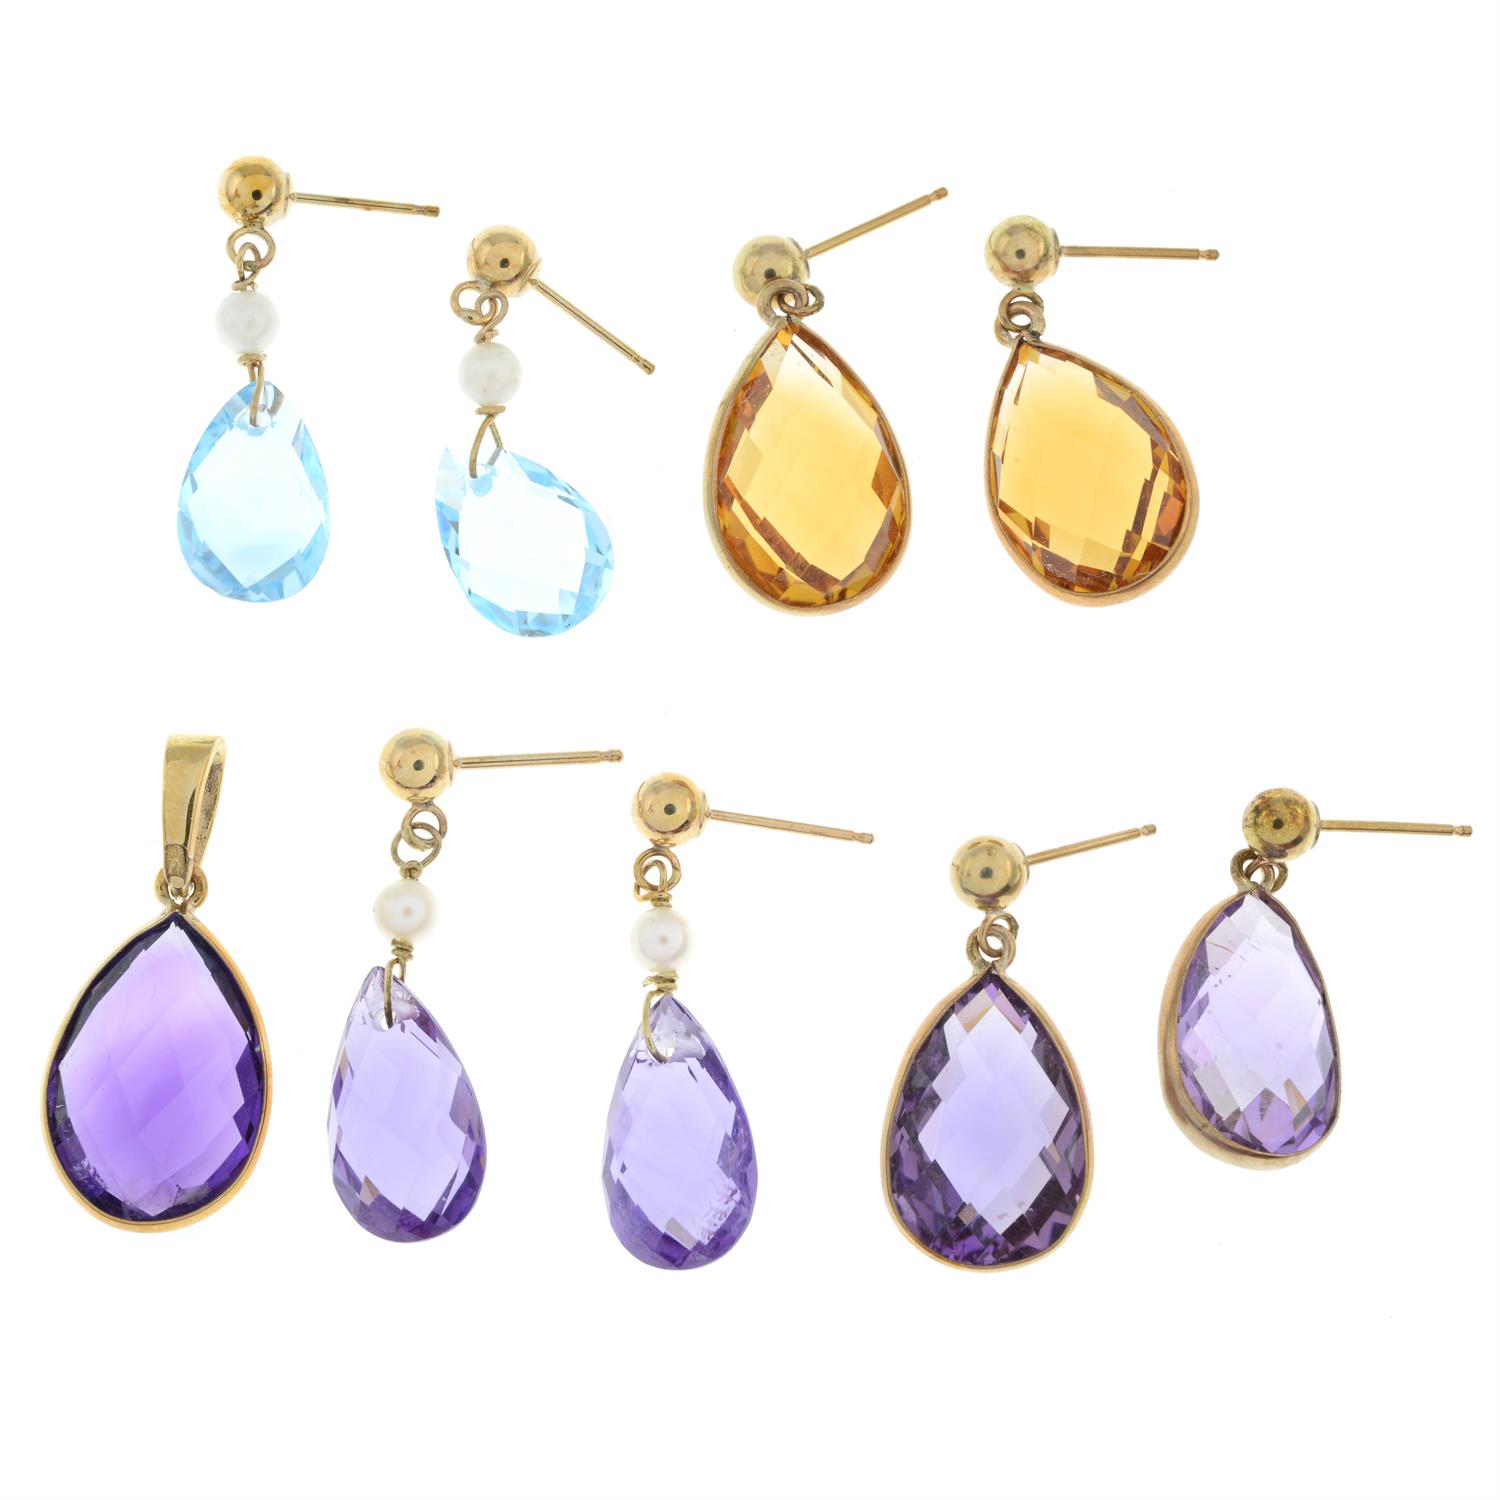 Four pairs of gem earrings & a pendant - Image 2 of 2